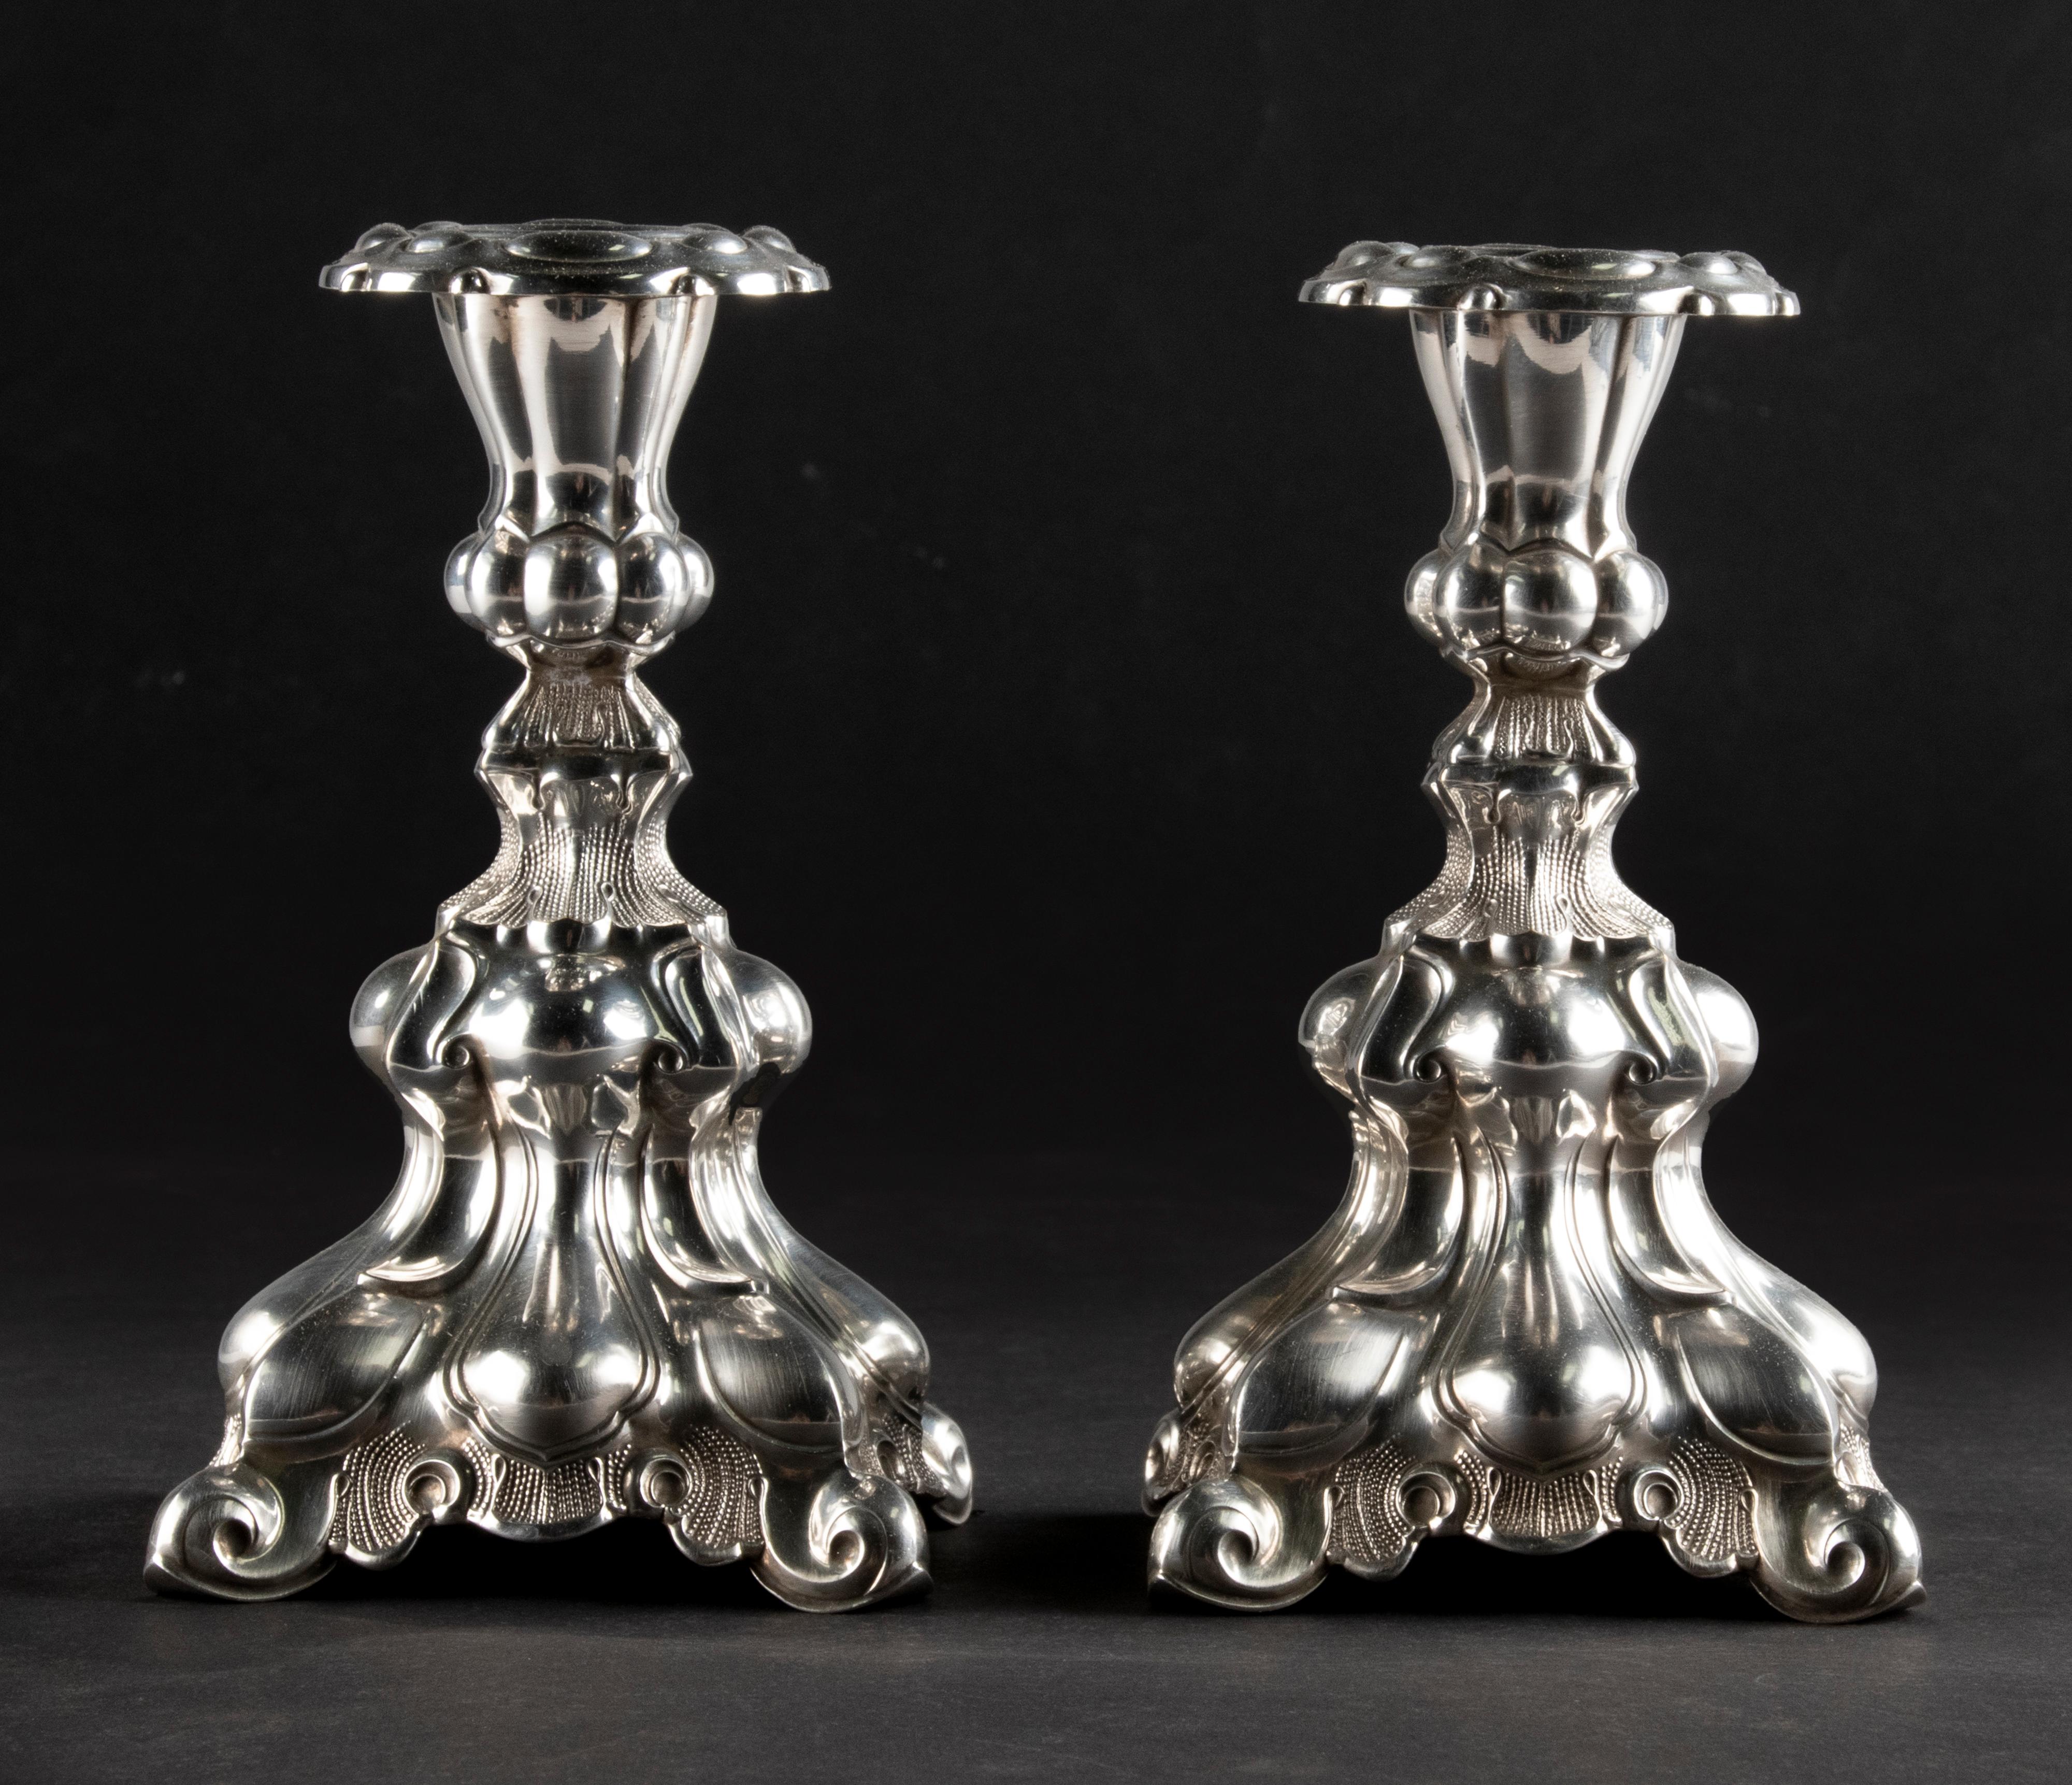 Rococo Revival A Pair of Early 20th Century Silver Candlesticks marked Denmark For Sale